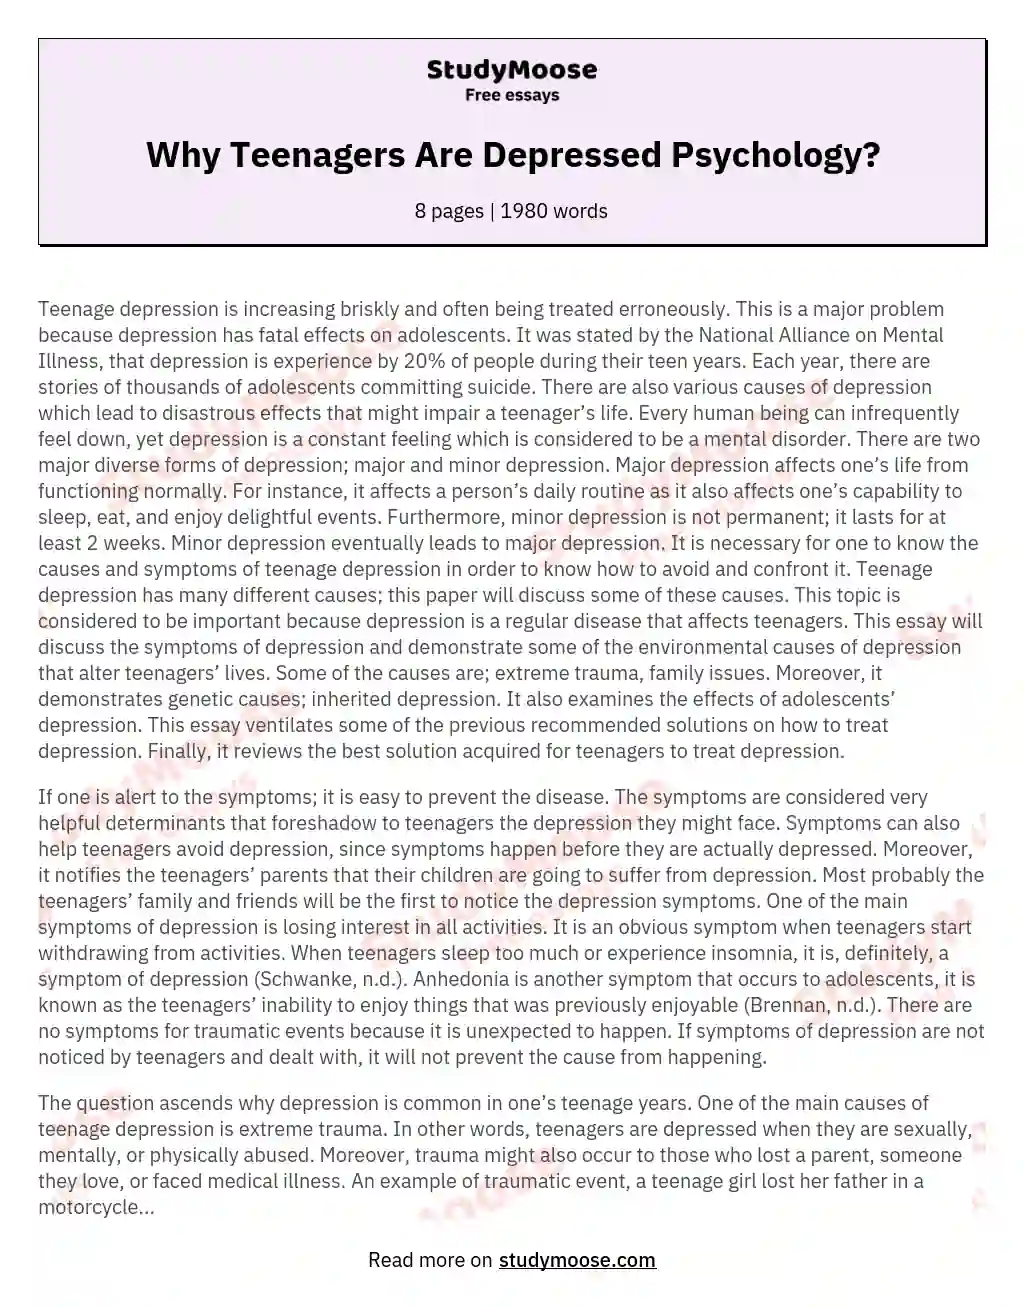 Why Teenagers Are Depressed Psychology? essay